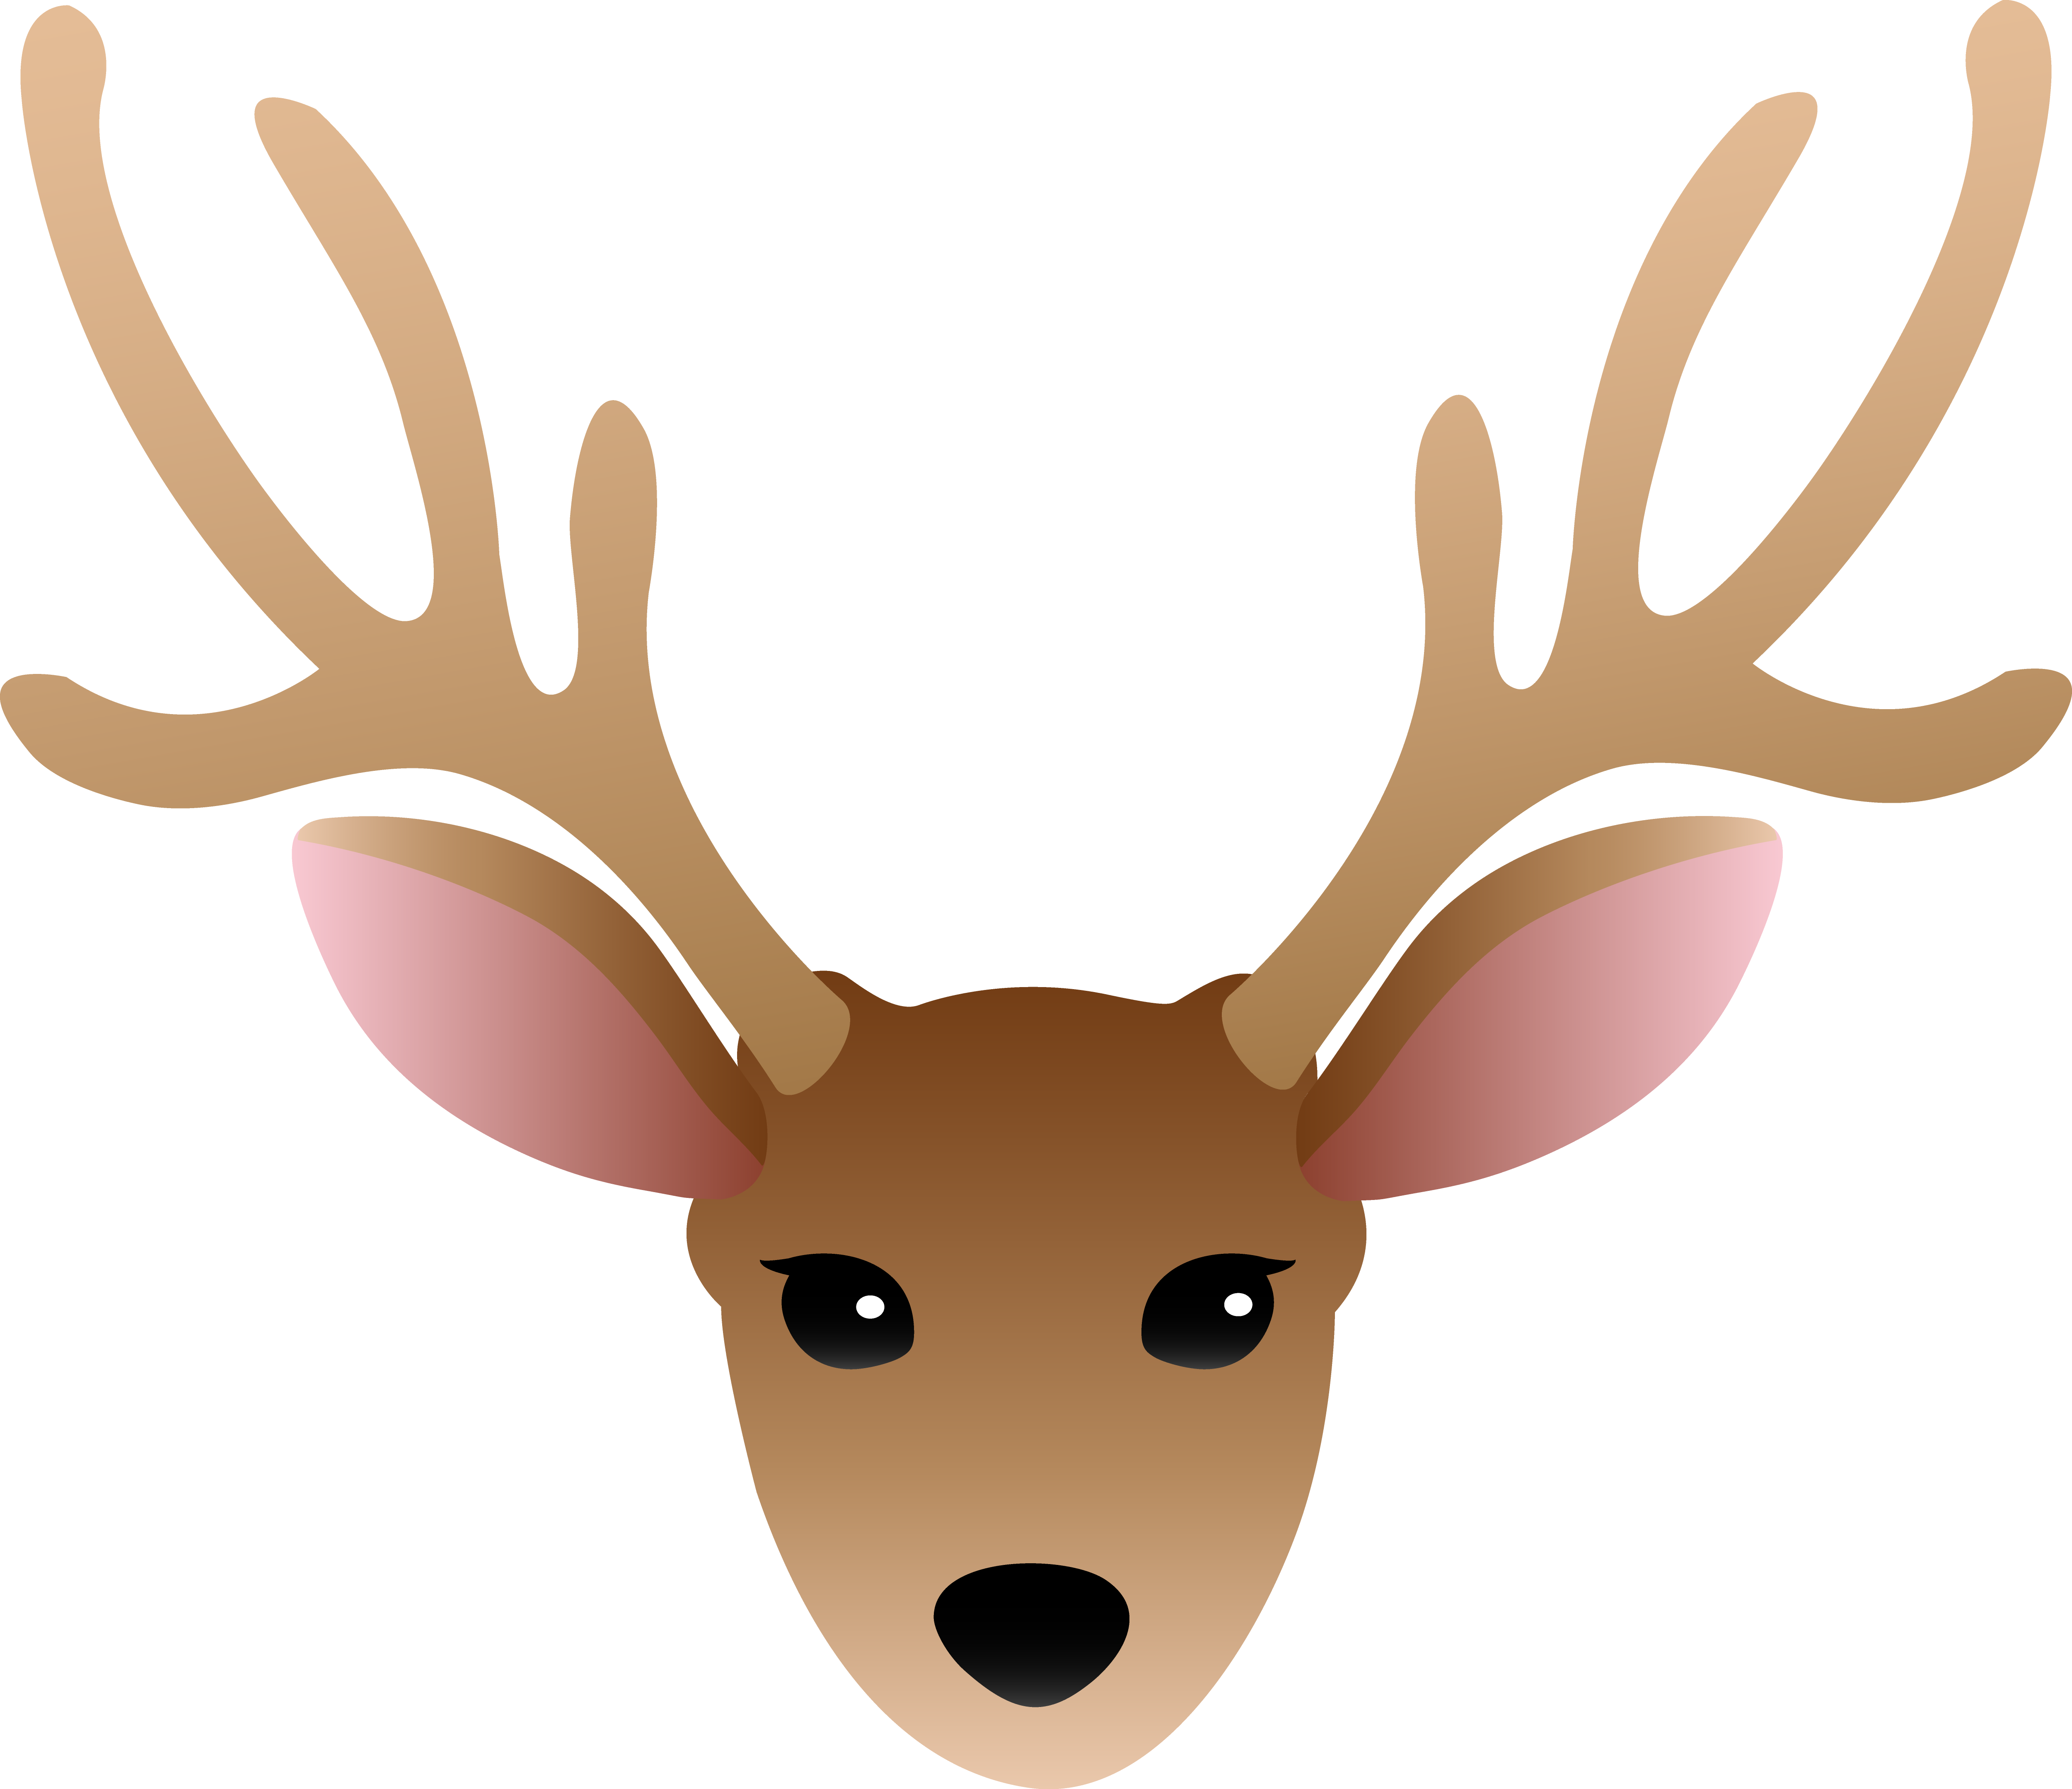 Simple deer pencil and. One clipart antler